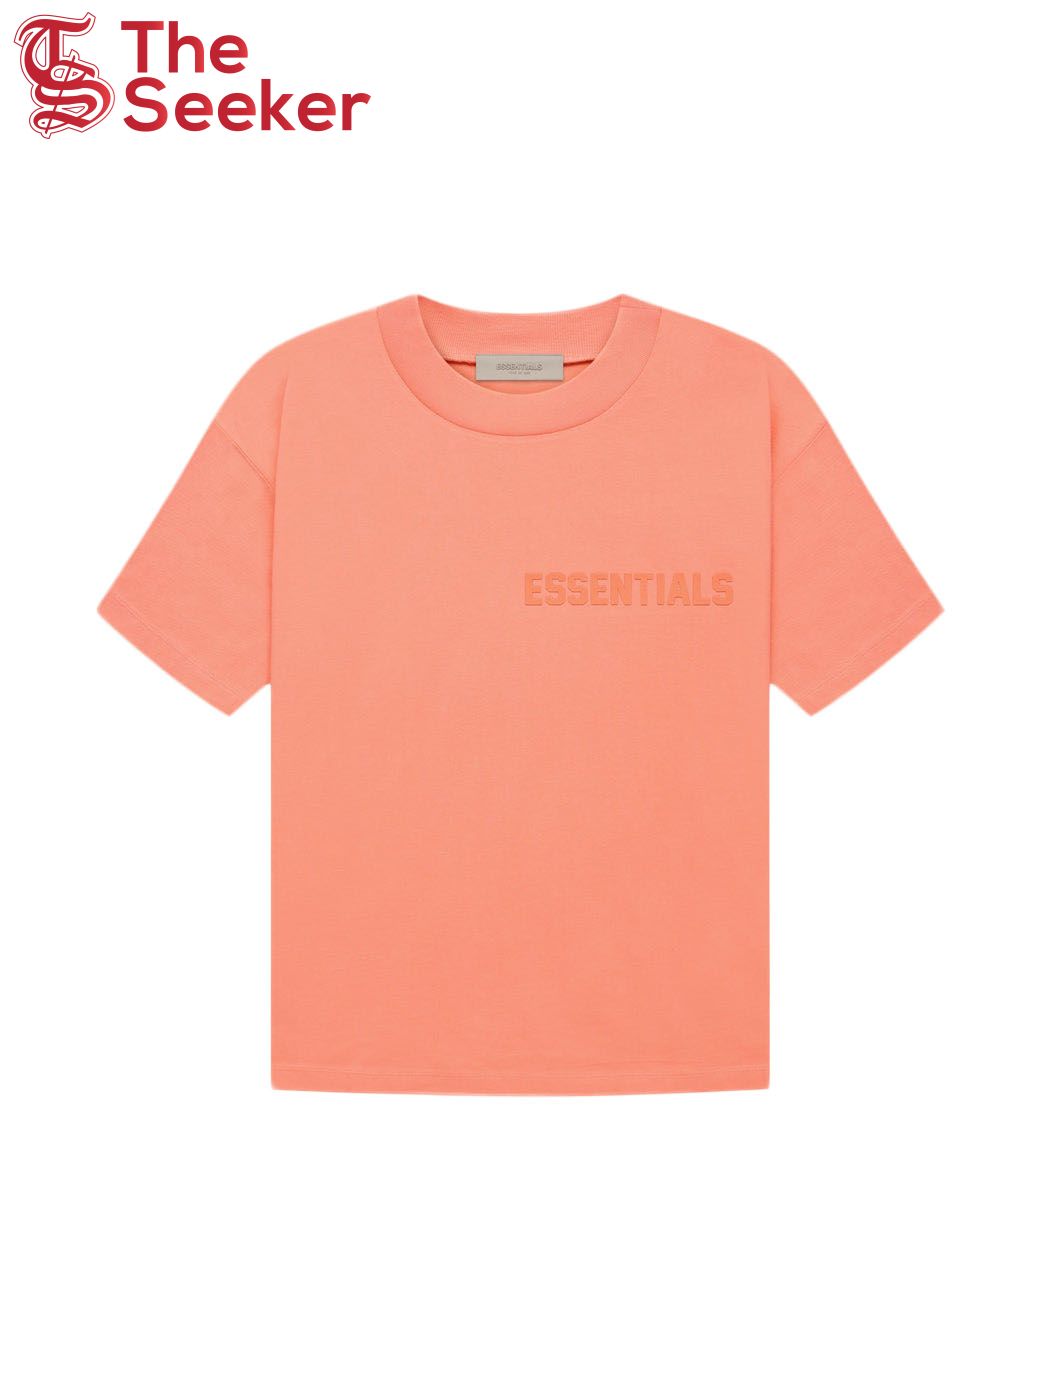 Fear of God Essentials Women's S/S T-shirt Coral